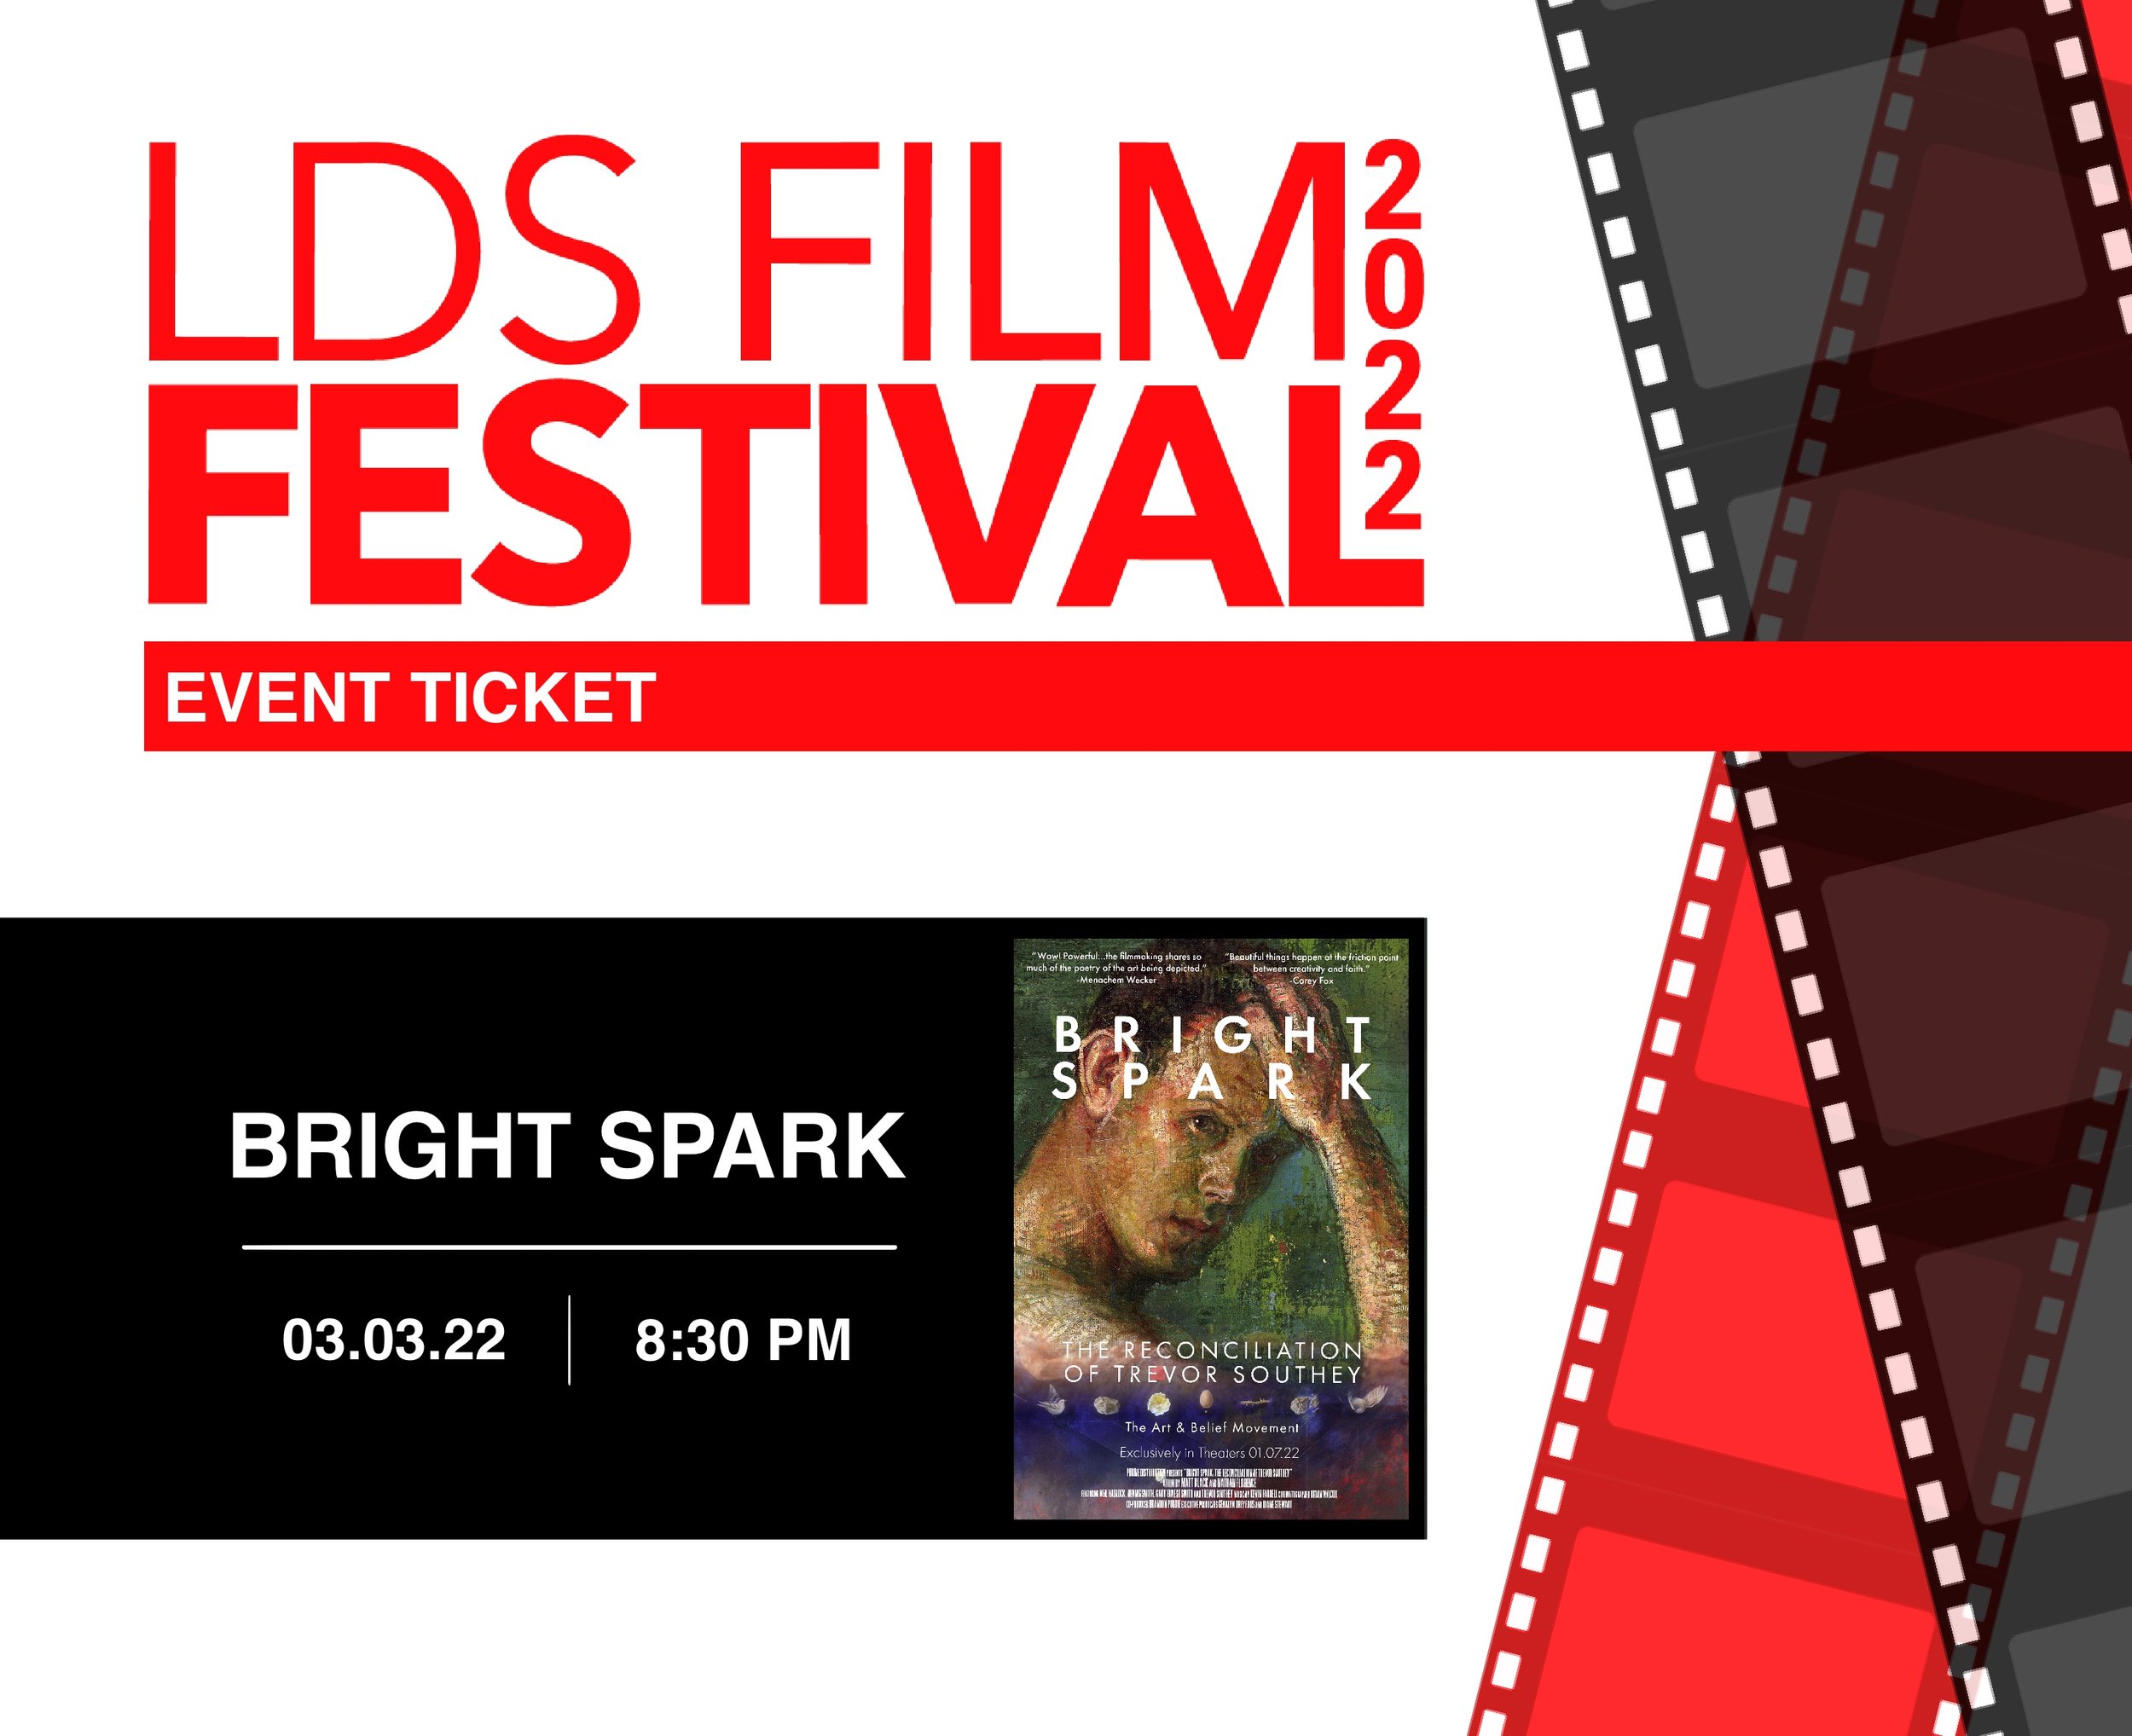 Bright Spark03.03.22 | 8:30 PMShowhouse II Theatre - 